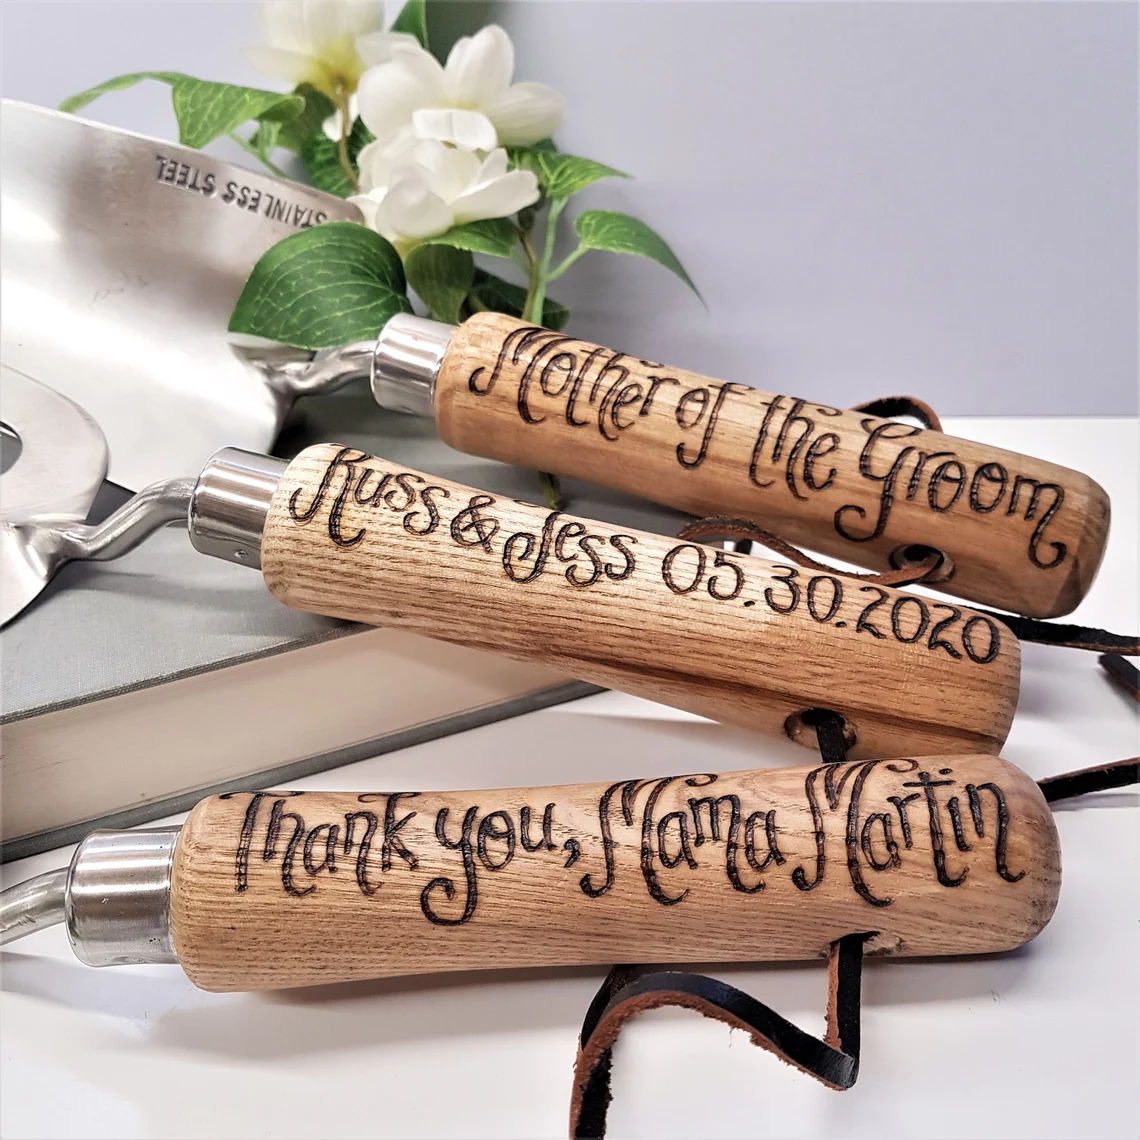 7 Mother Of The Groom Gift Ideas For Your Wedding Day